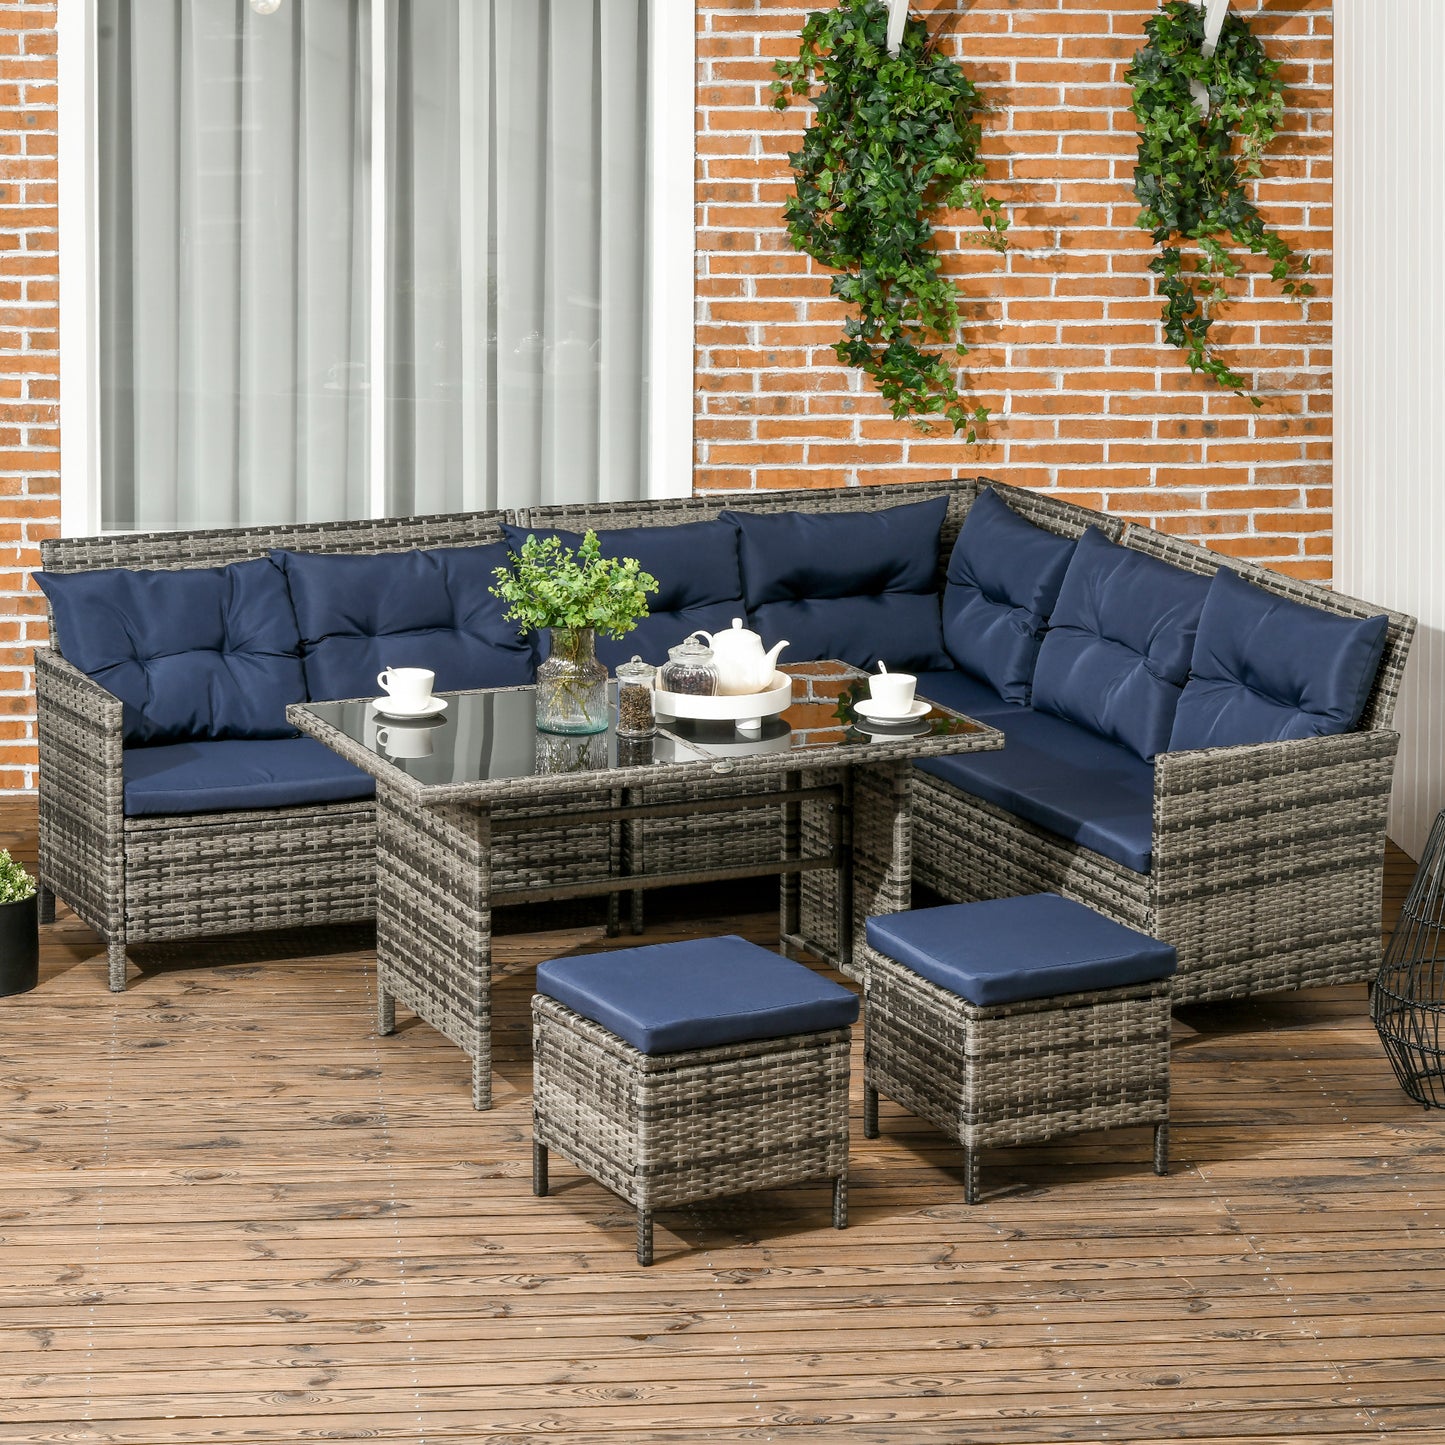 Outsunny 8-Seater Patio wicker Sofa Set Rattan Chair Furniture w/ Glass & Cushioned